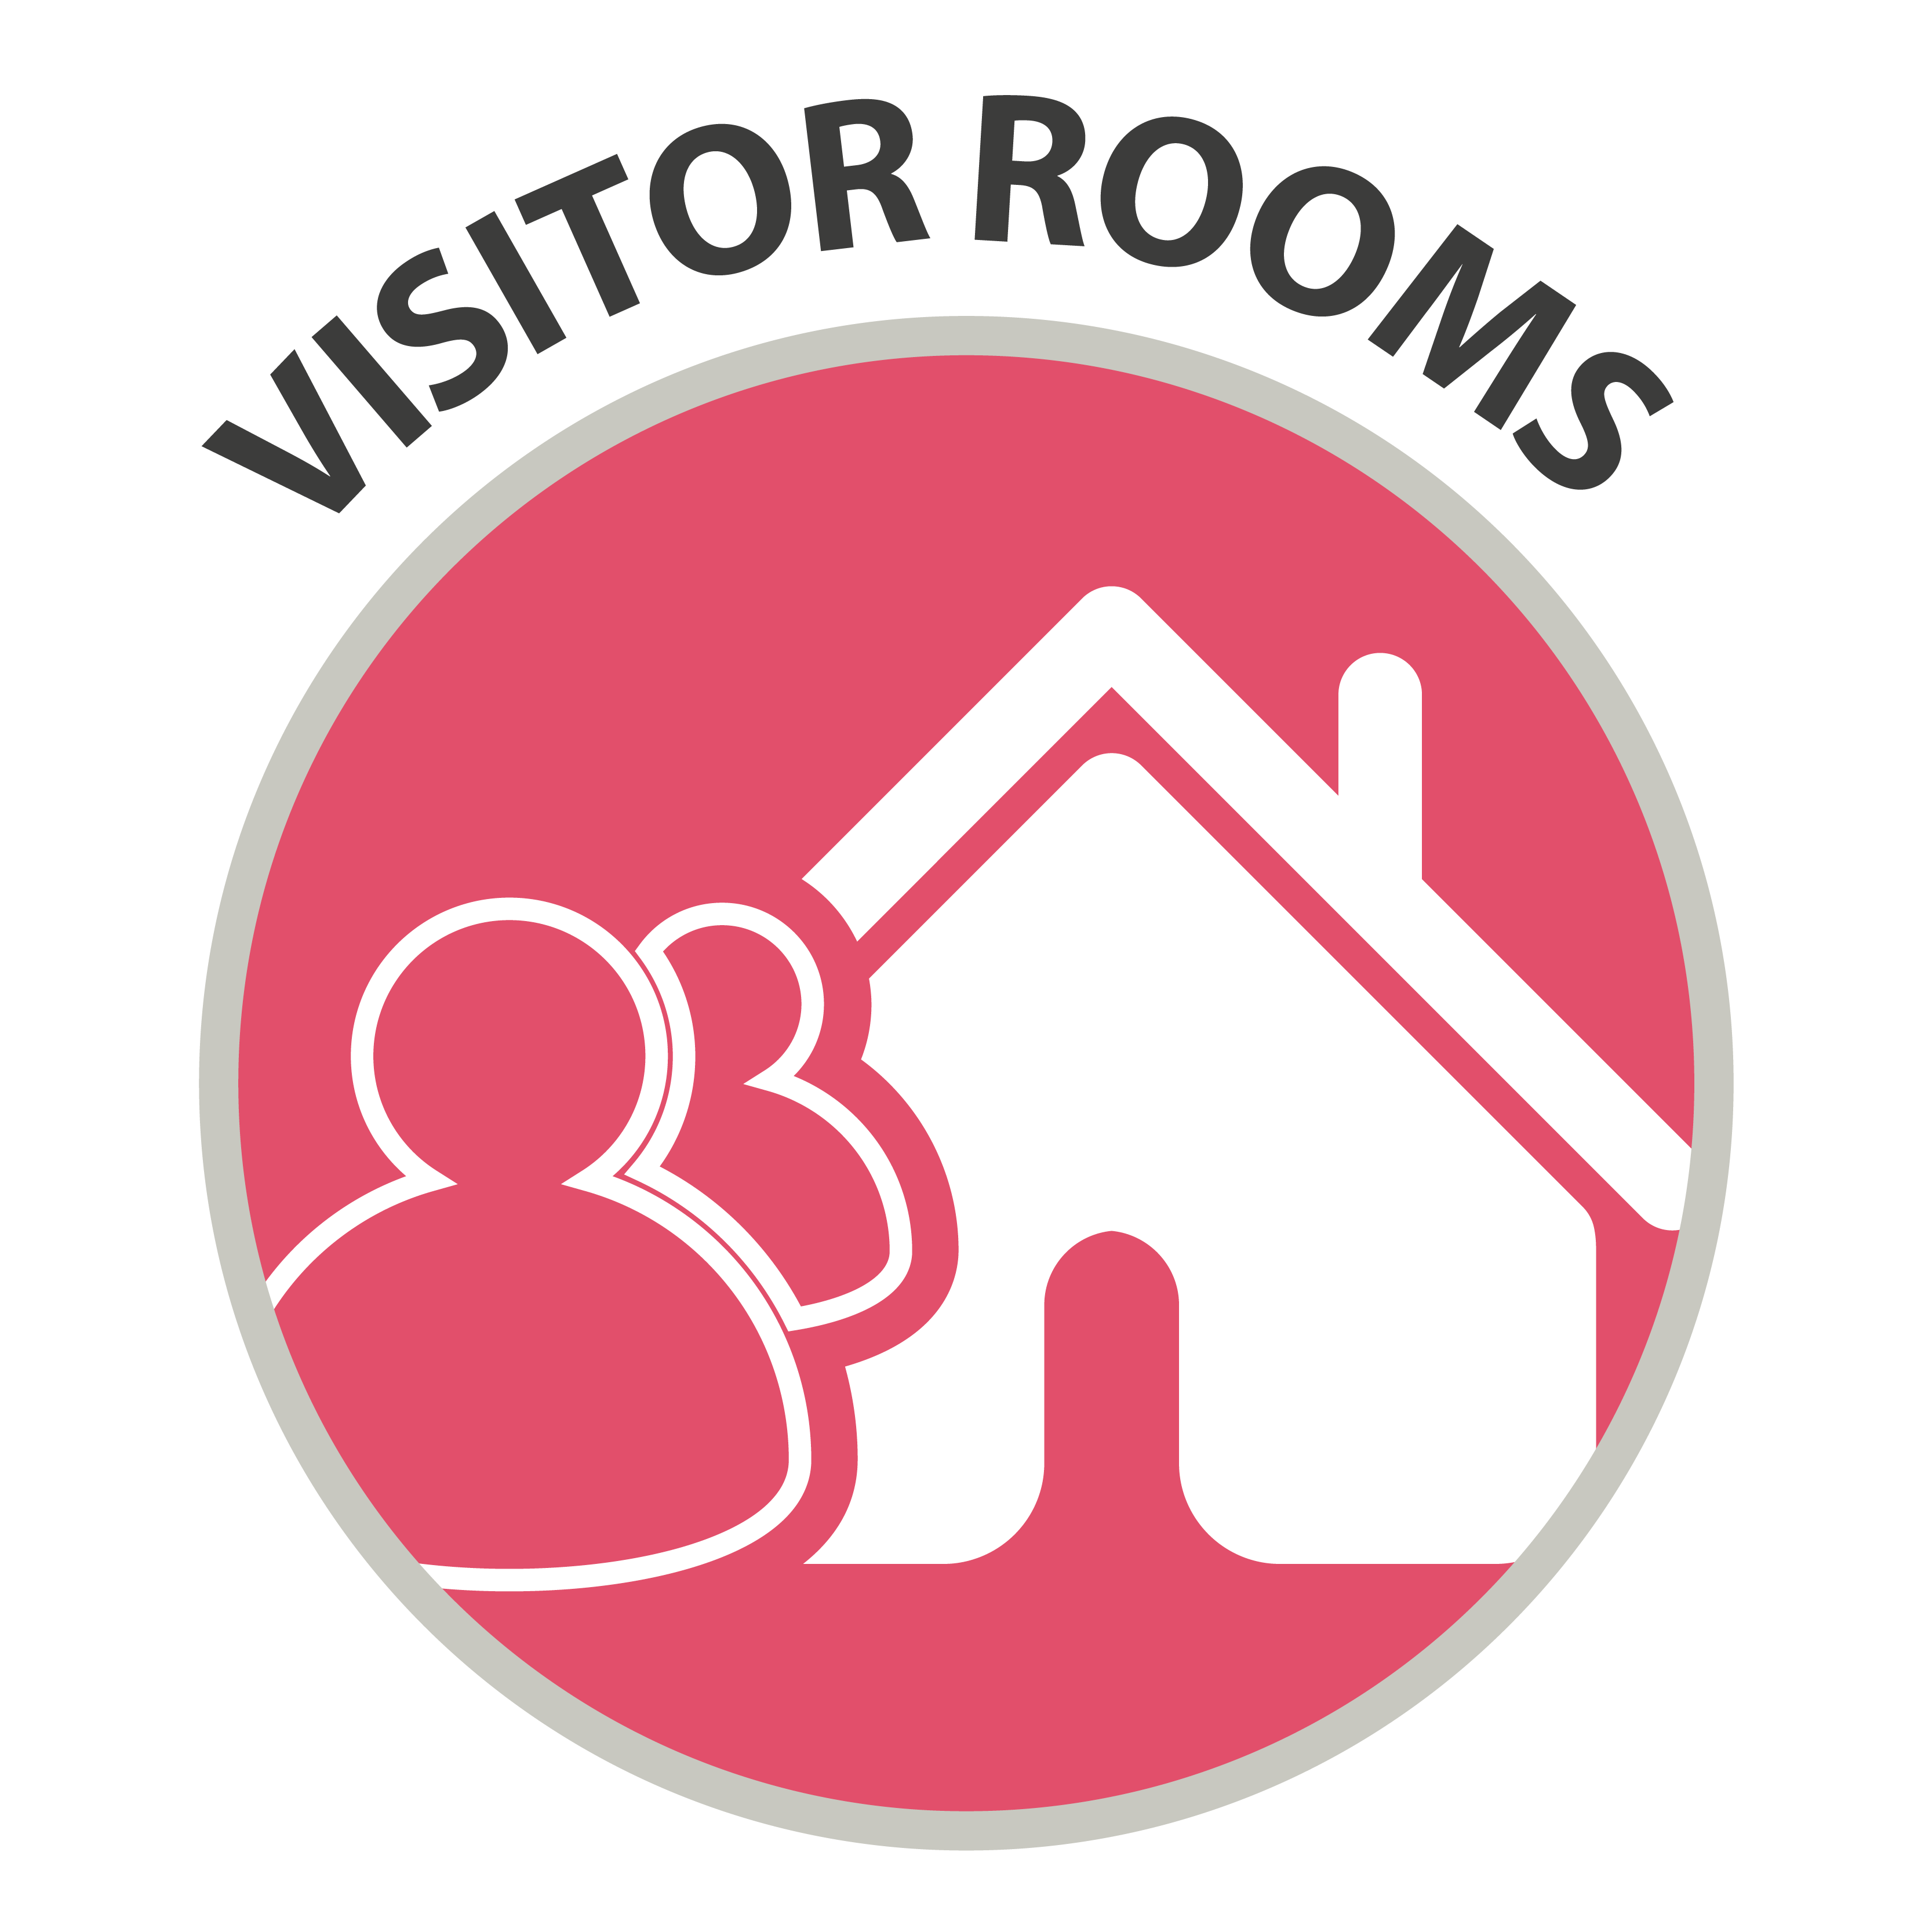 Visitor Rooms - icon of people and a home